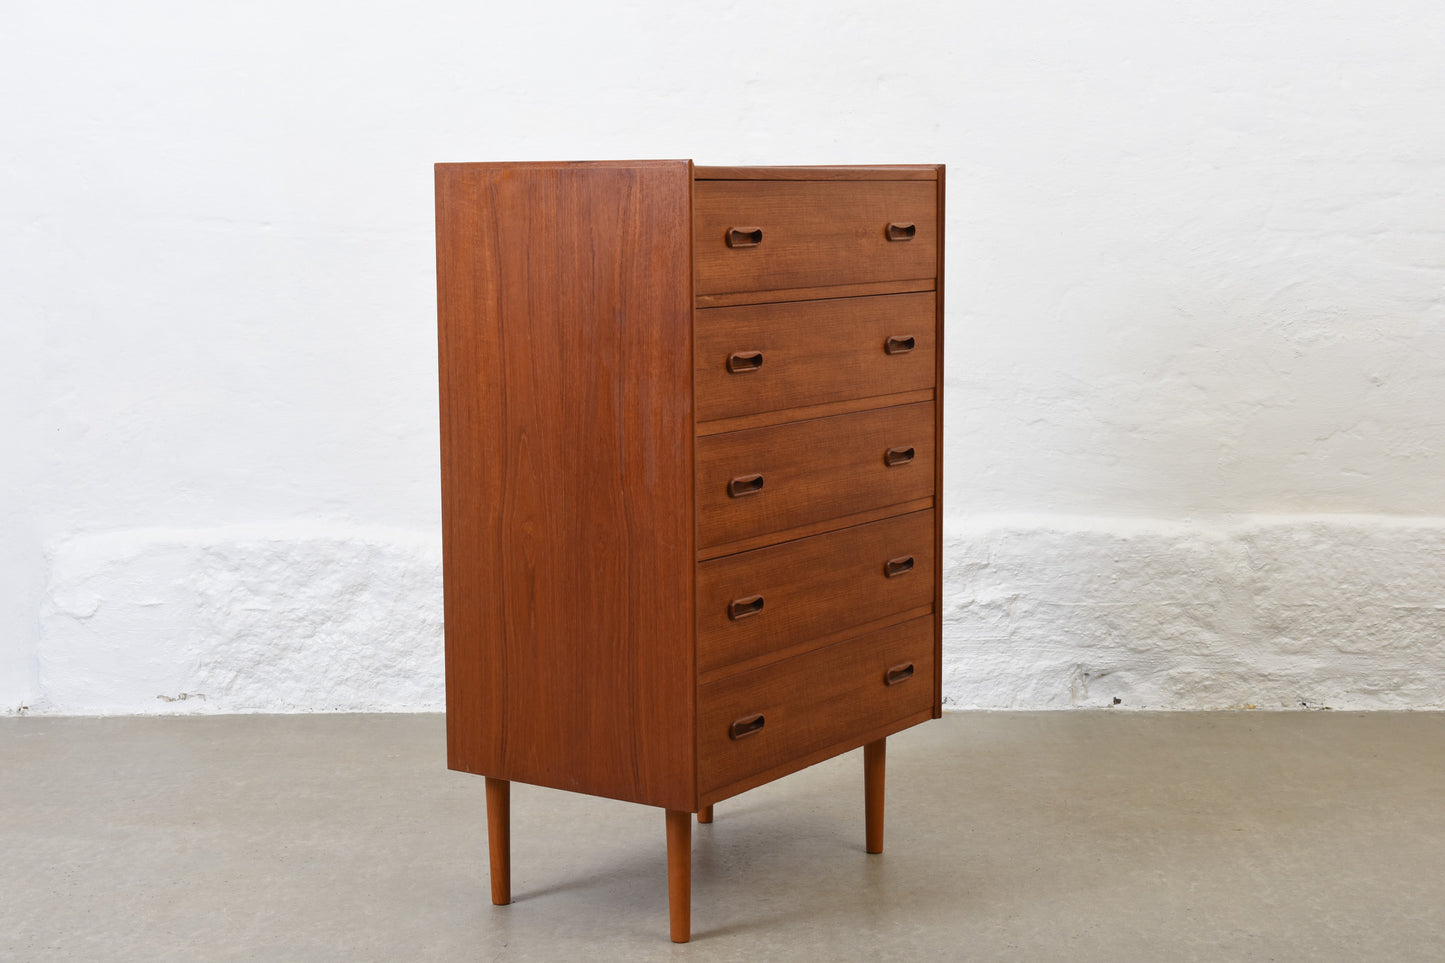 1960s teak chest with inset handles